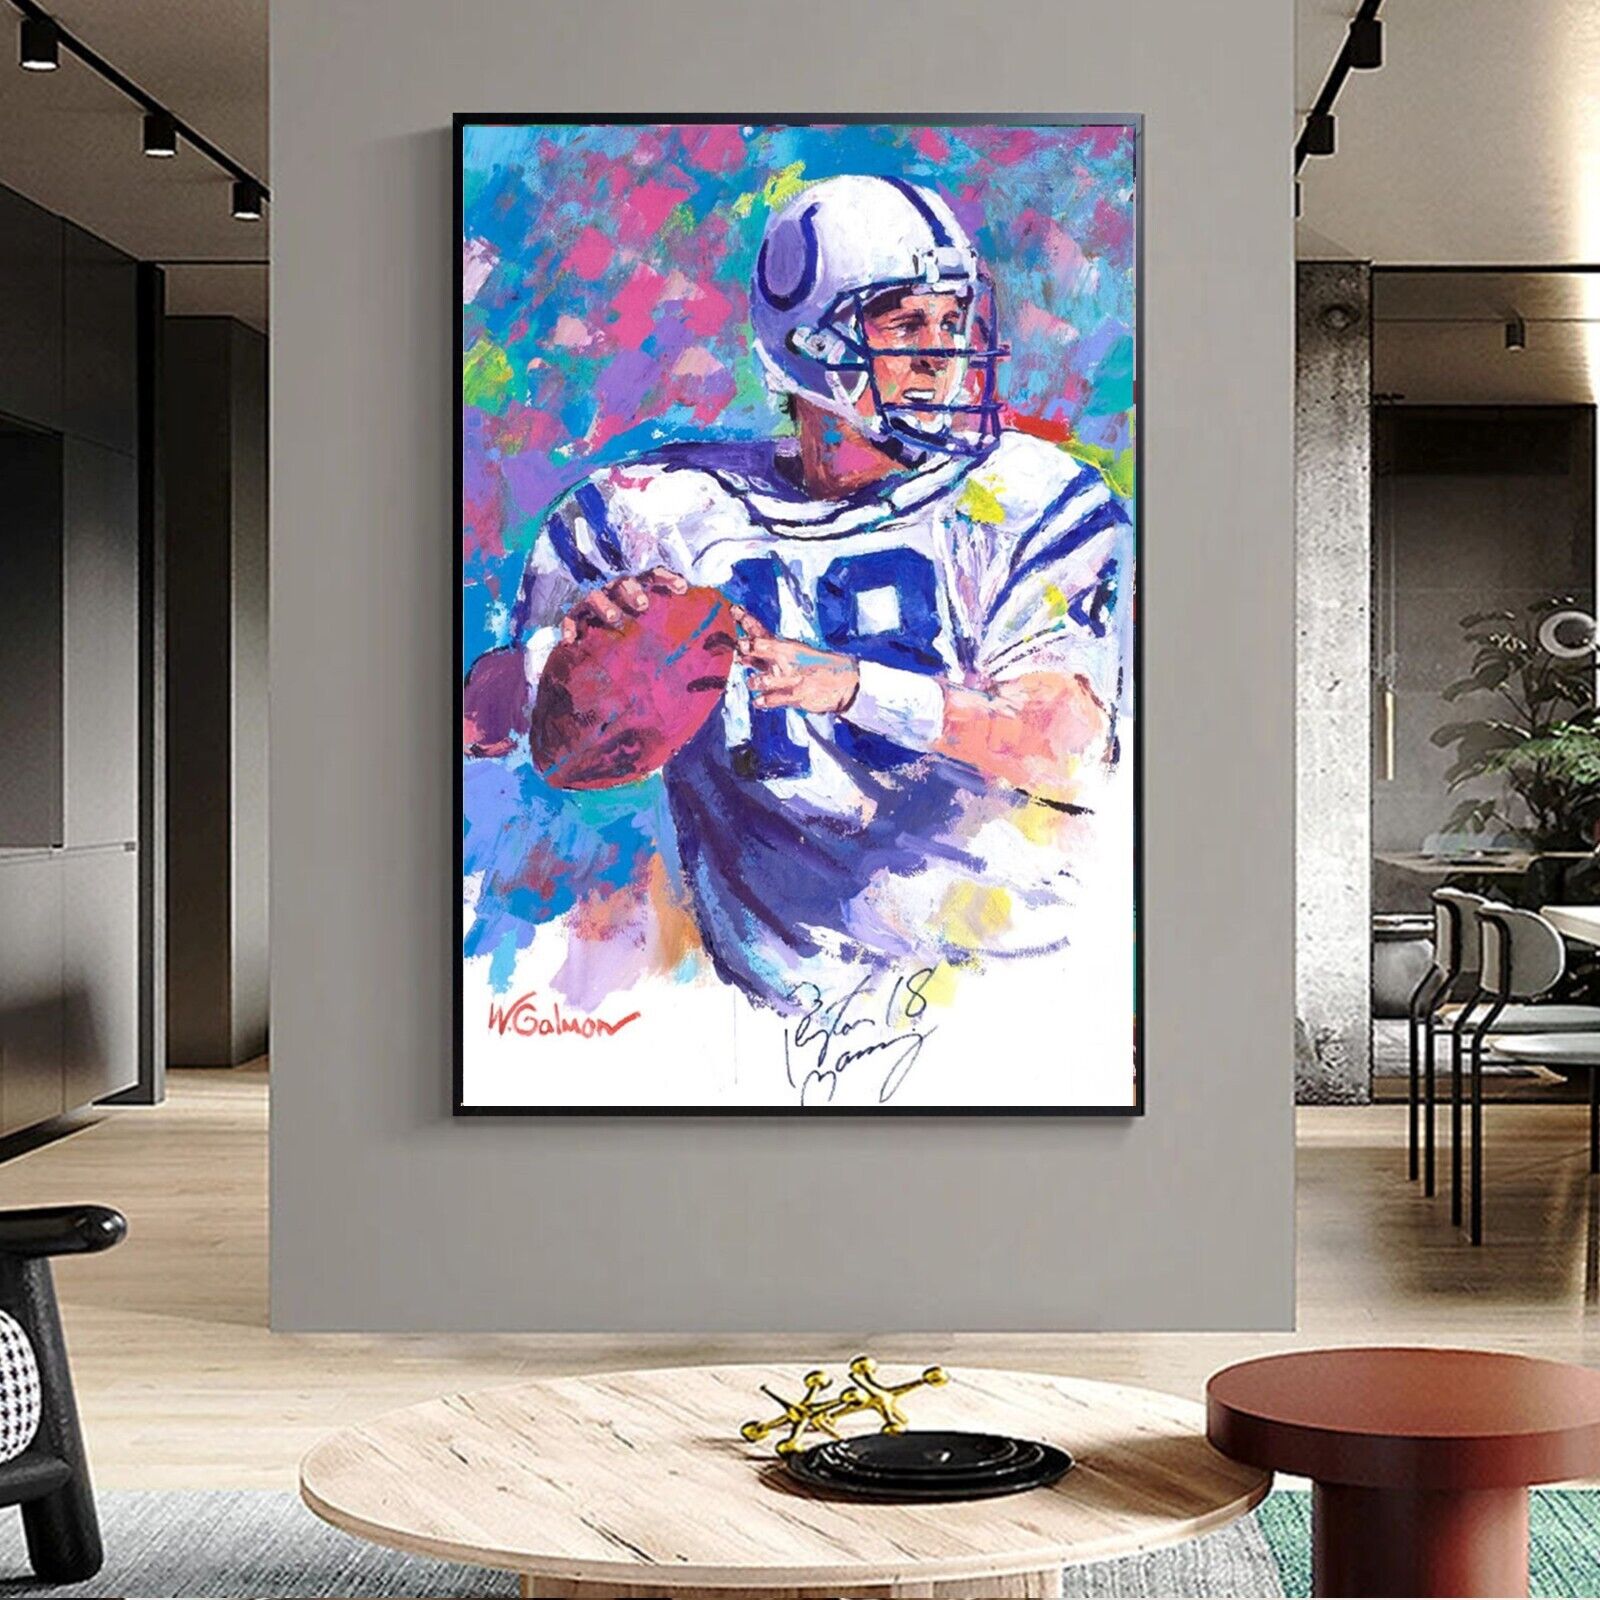 Sale Signed Payton Manning Handmade Acrylic Painting 48H X 36 Was $7K Now $1,295